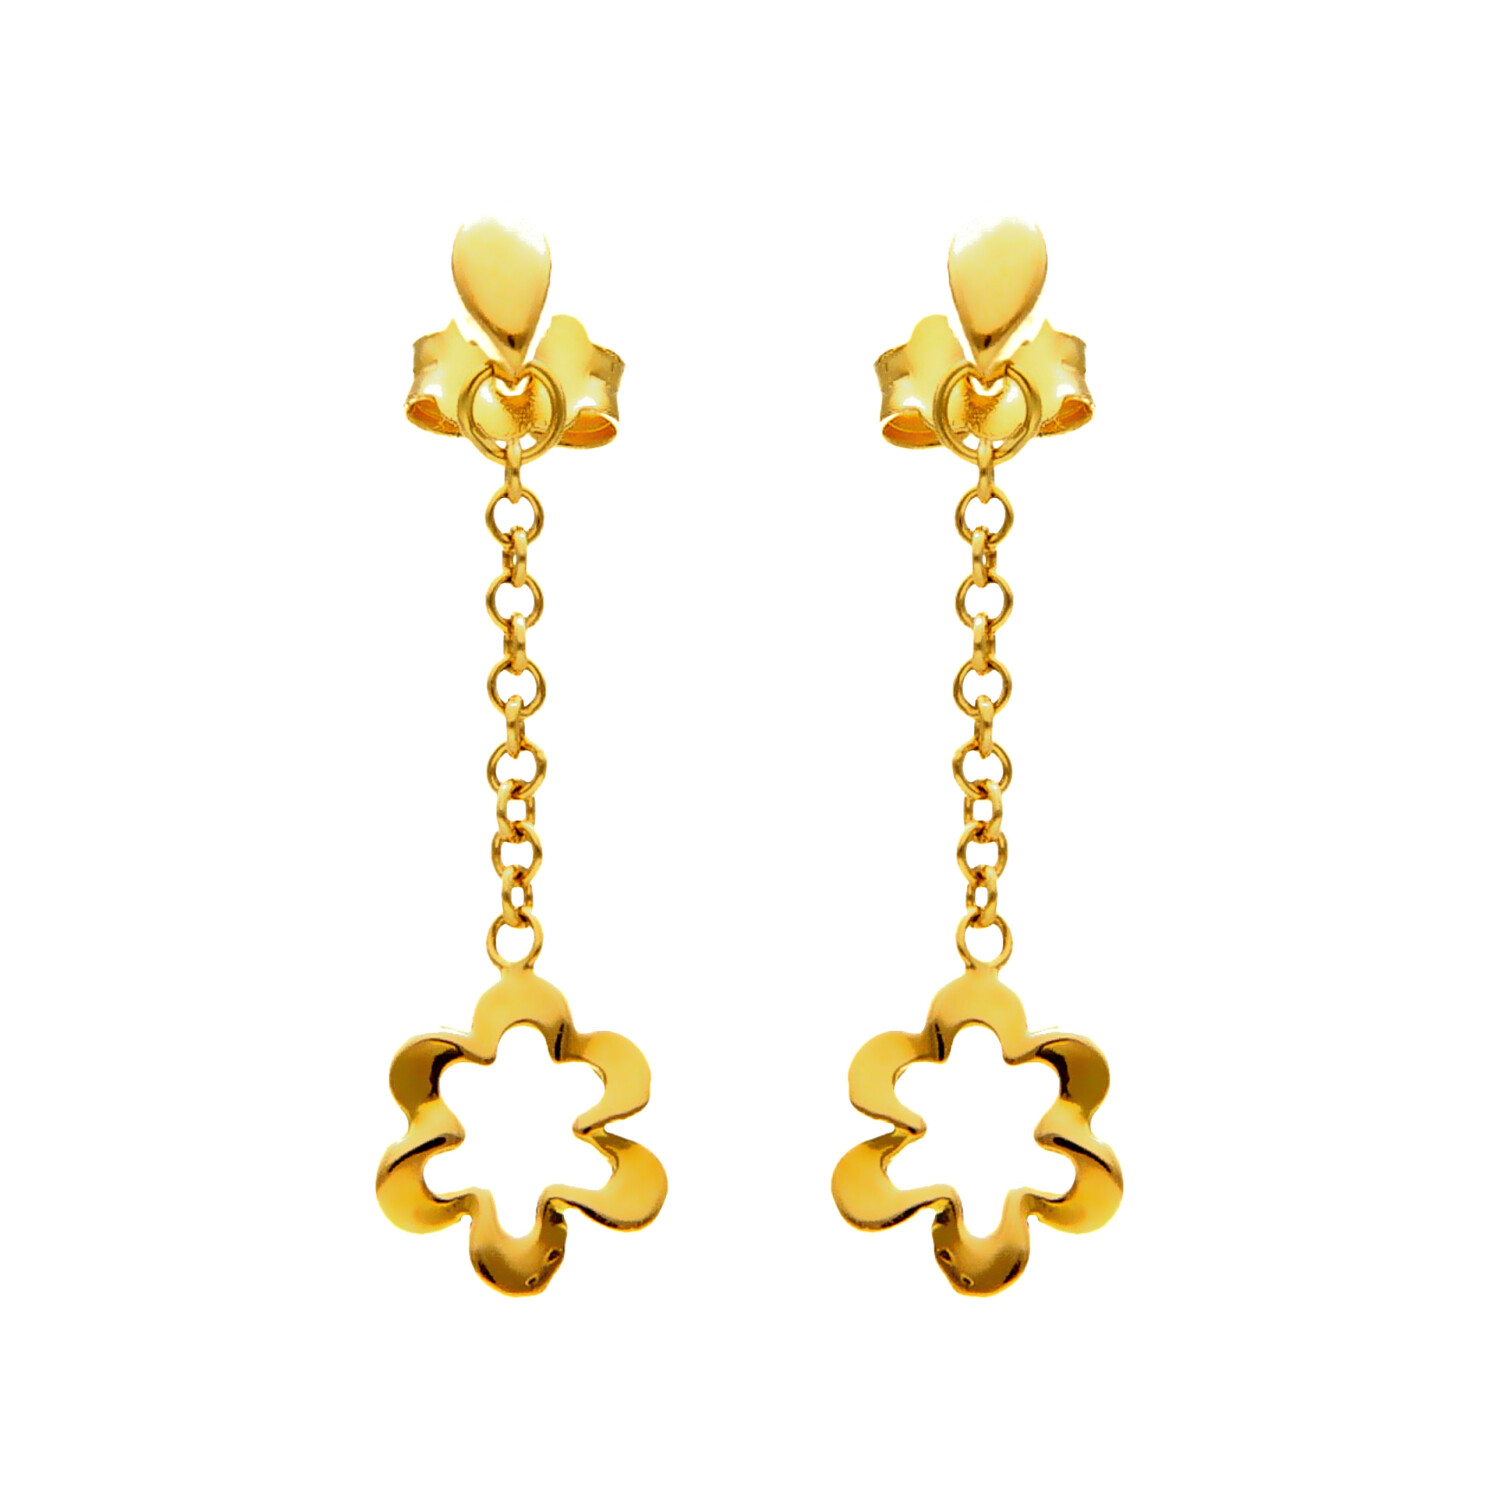 Yellow gold earrings with flower